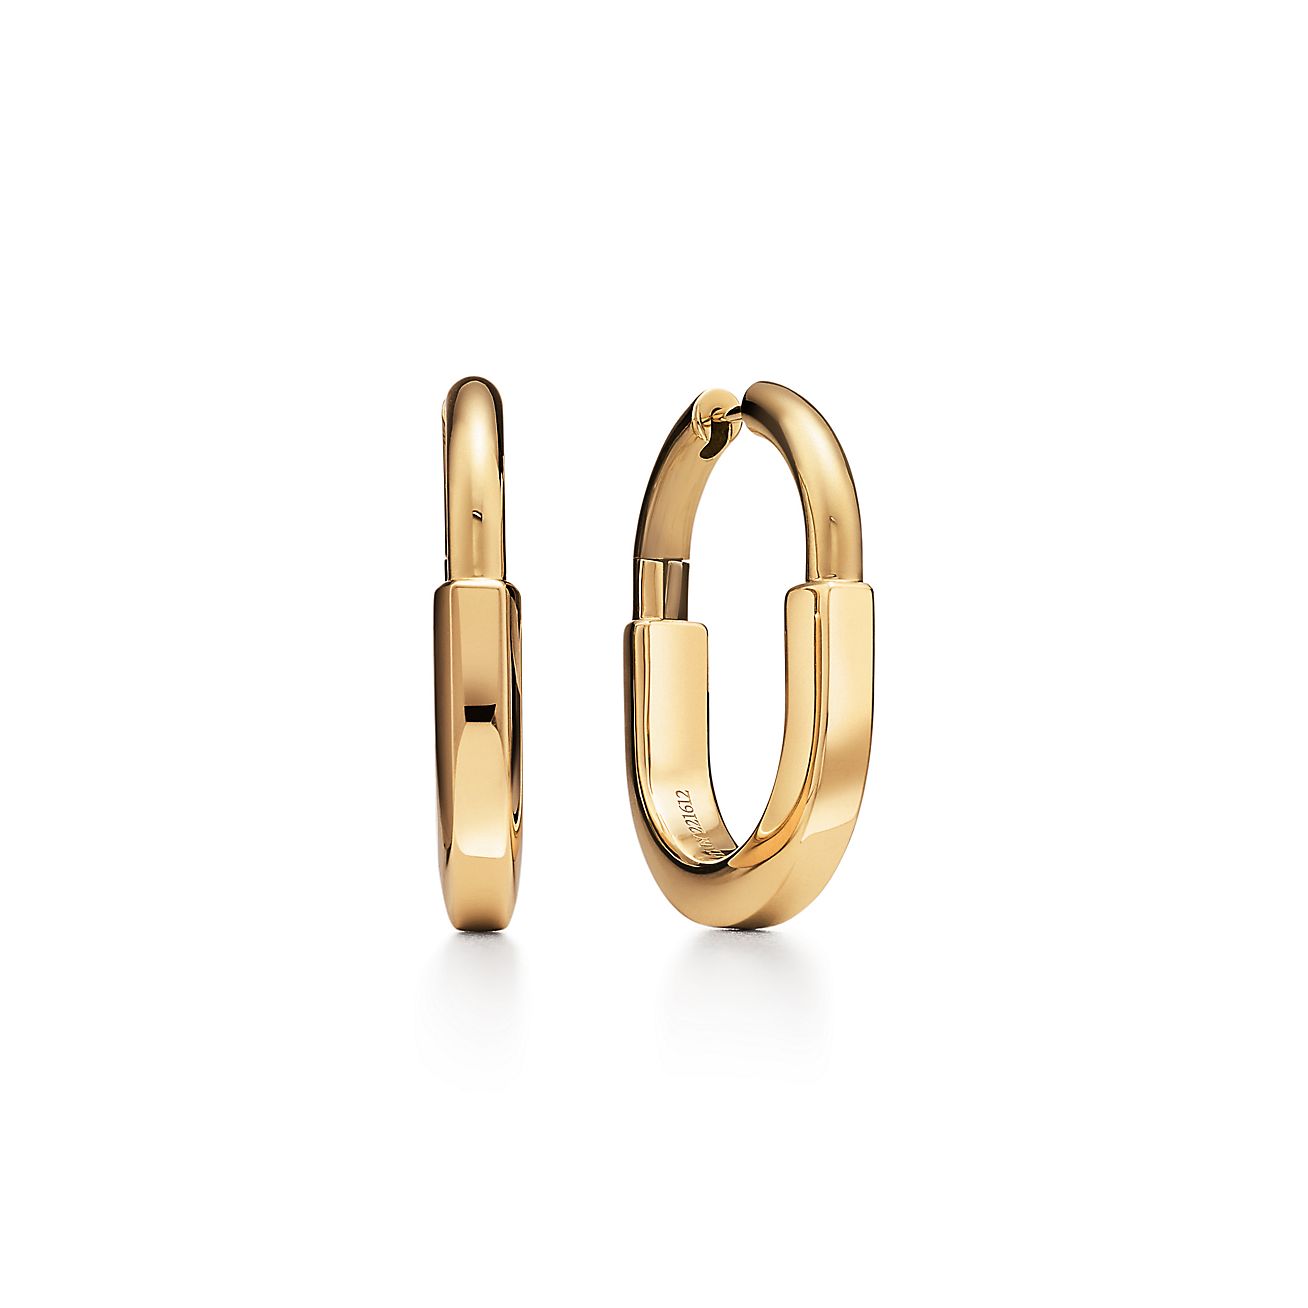 18K gold earrings as a gift? Find them here and get them customised!